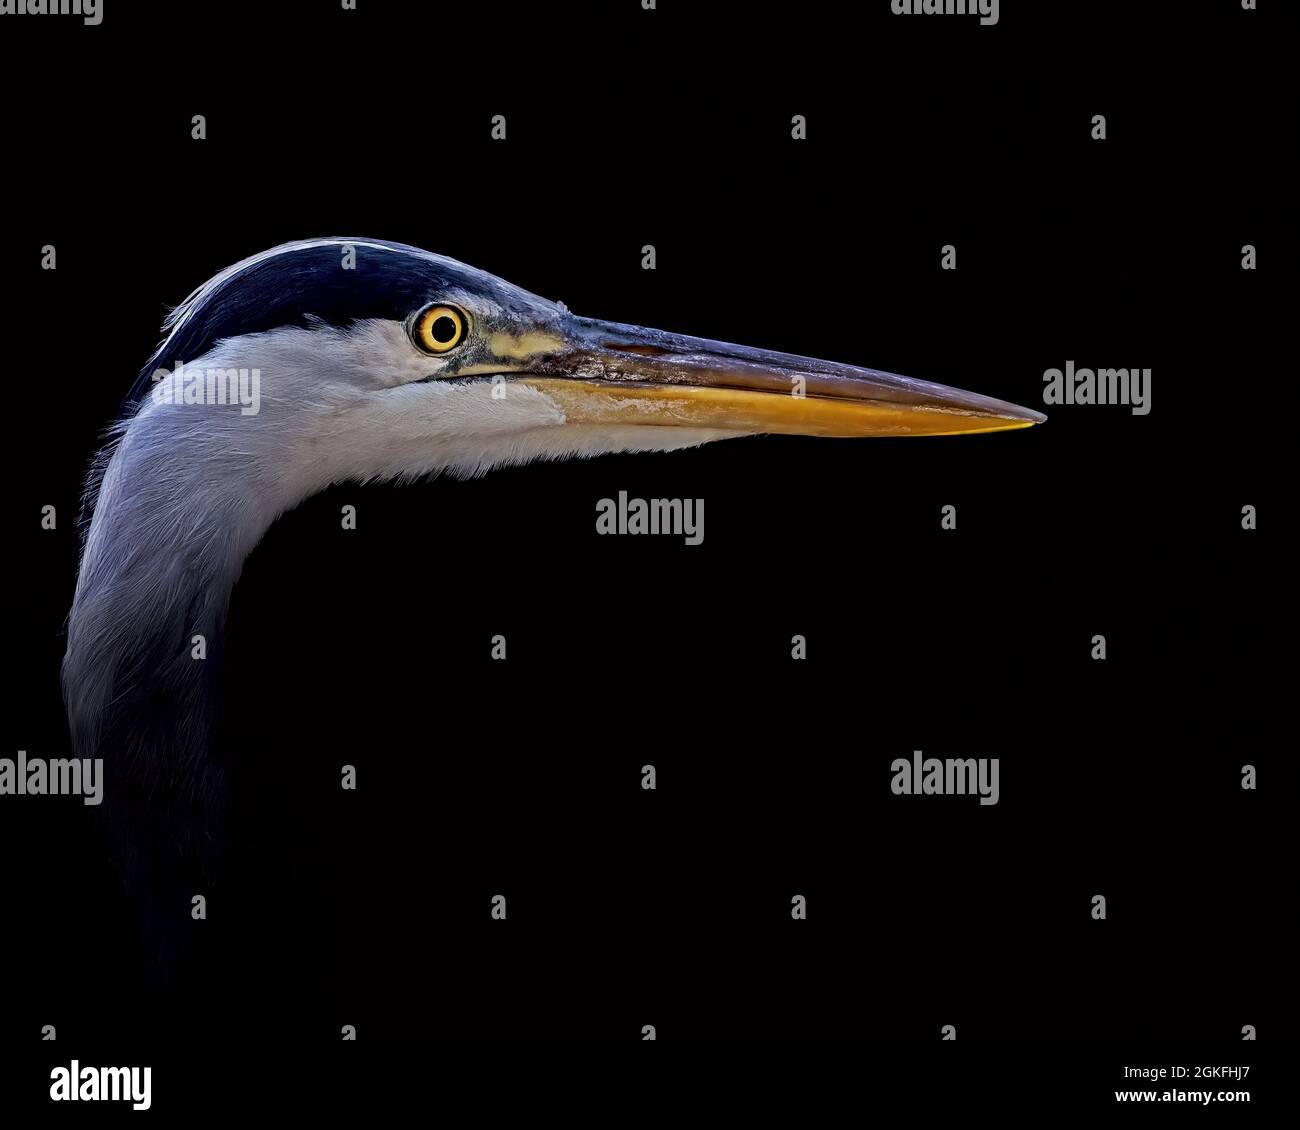 close up of the head of a grey heron,Ardea cinerea, isolated on black background Stock Photo